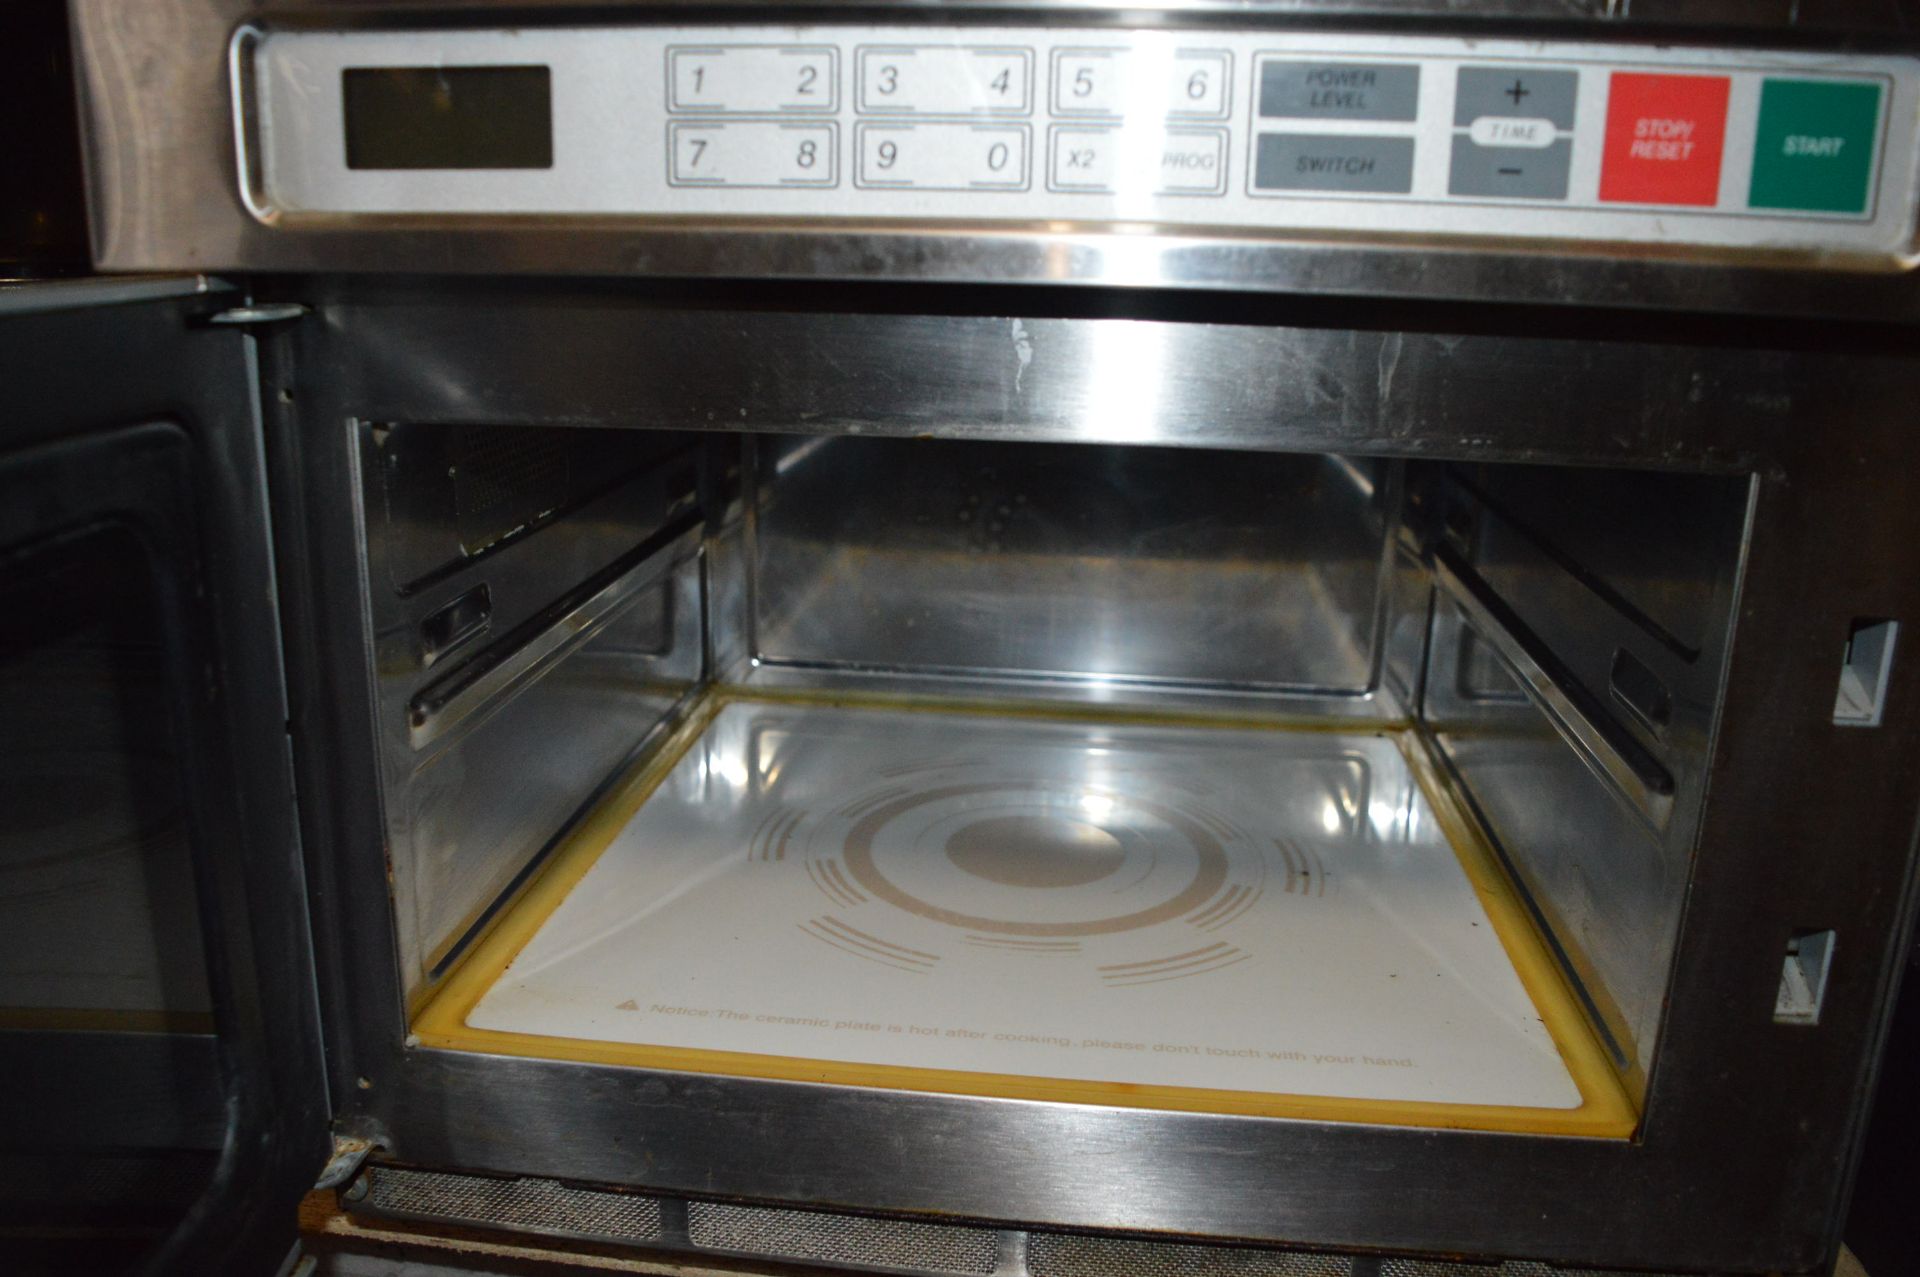 Easy Microwave Oven - Image 2 of 3